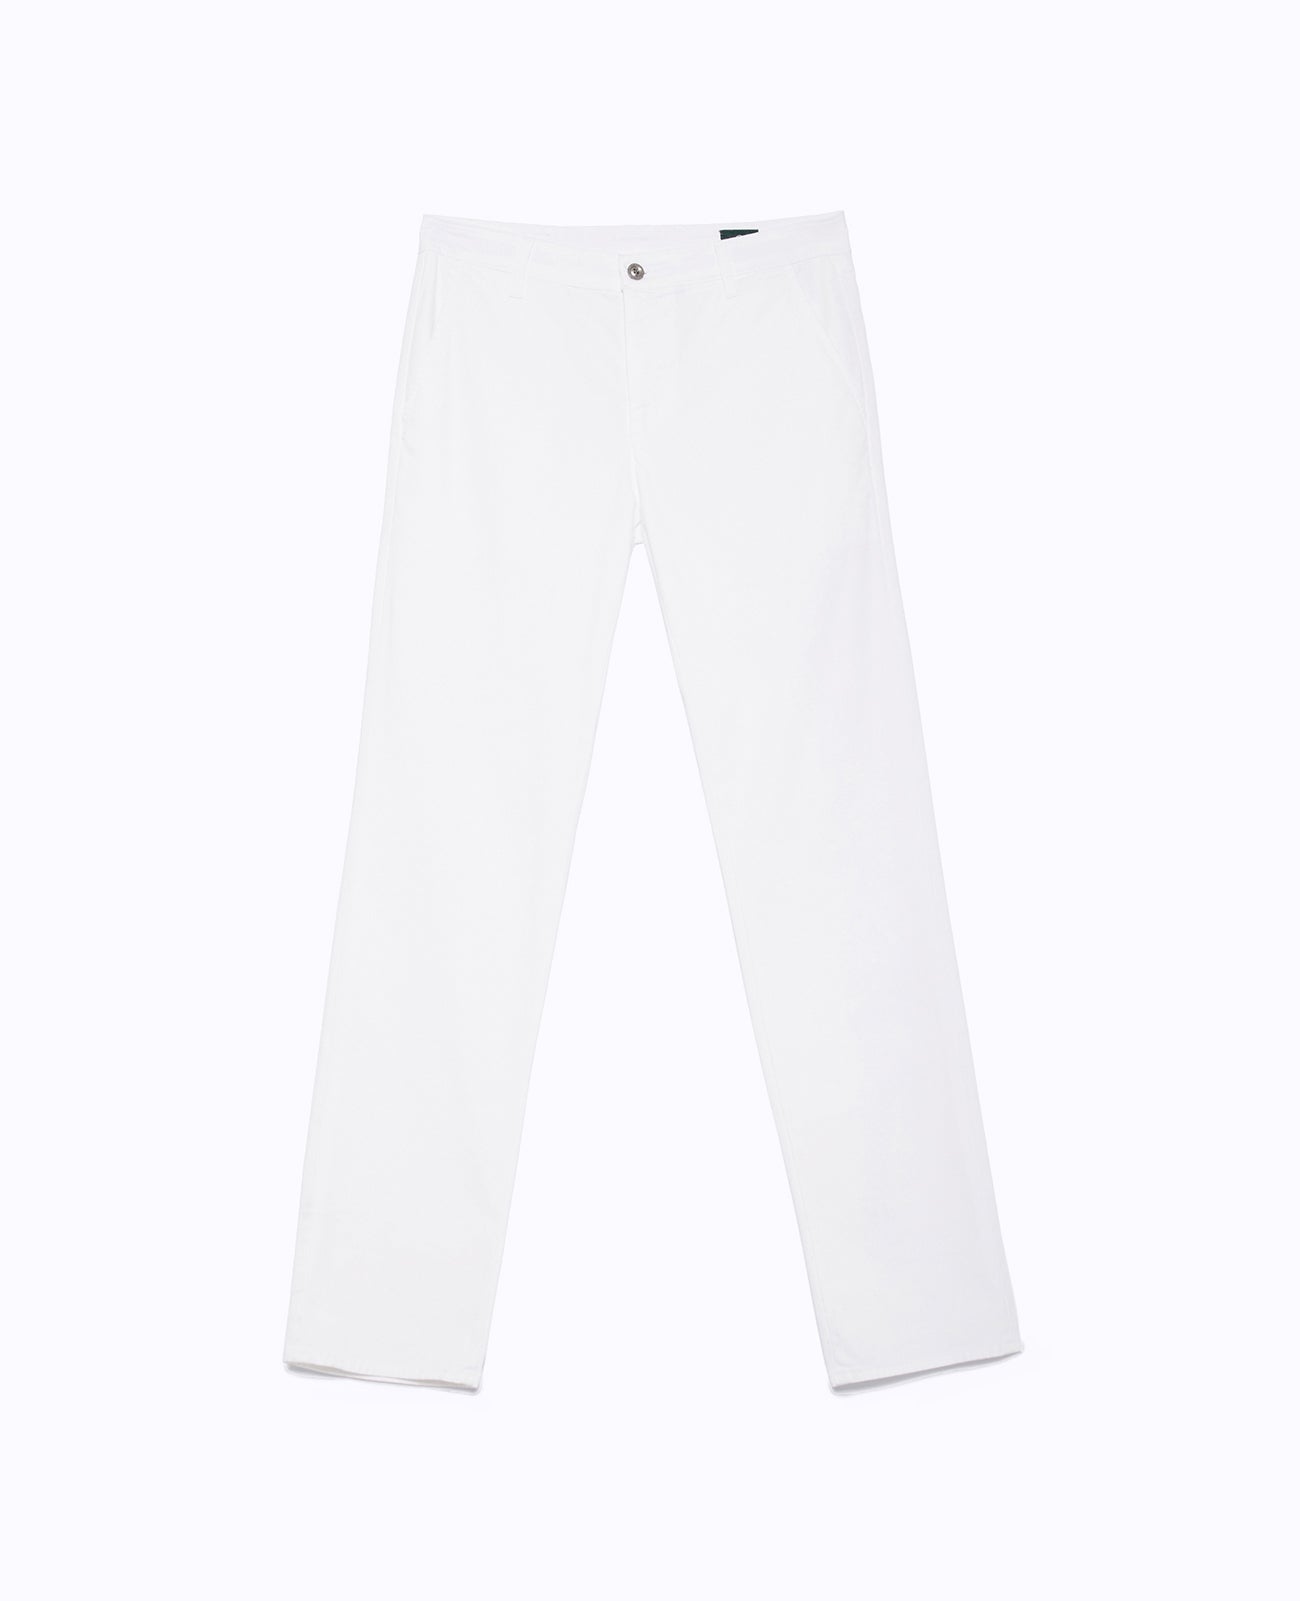 Andrew Trouser Bright White Green Label Collection Men Bottoms Photo 6